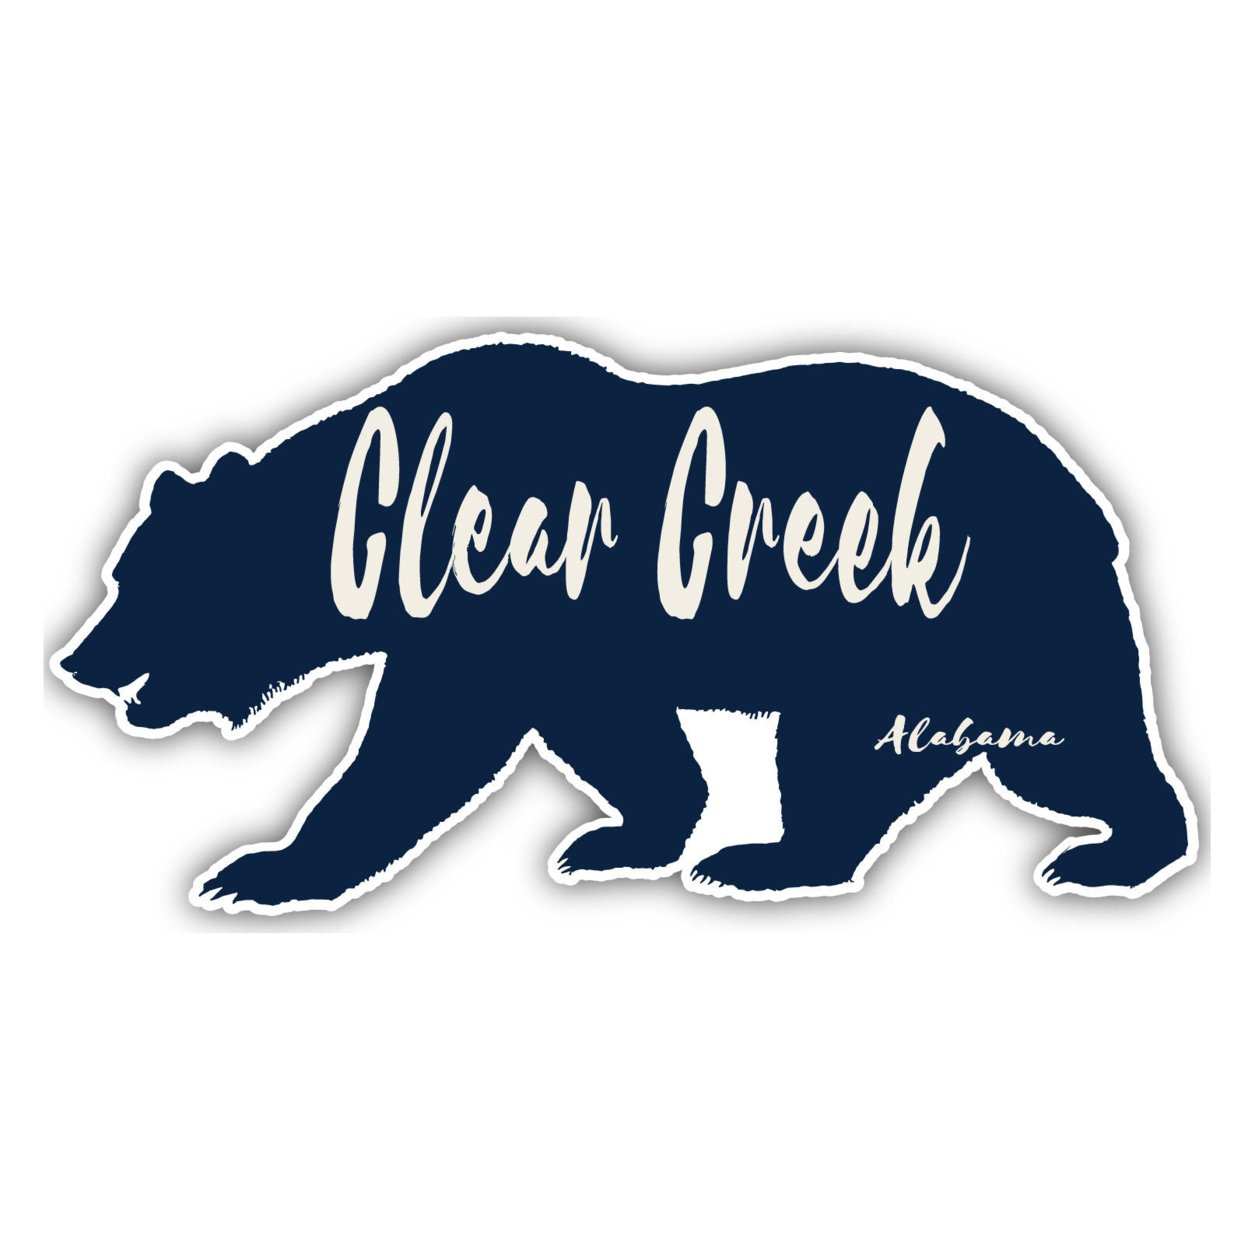 Clear Creek Alabama Souvenir Decorative Stickers (Choose Theme And Size) - 4-Pack, 10-Inch, Adventures Awaits